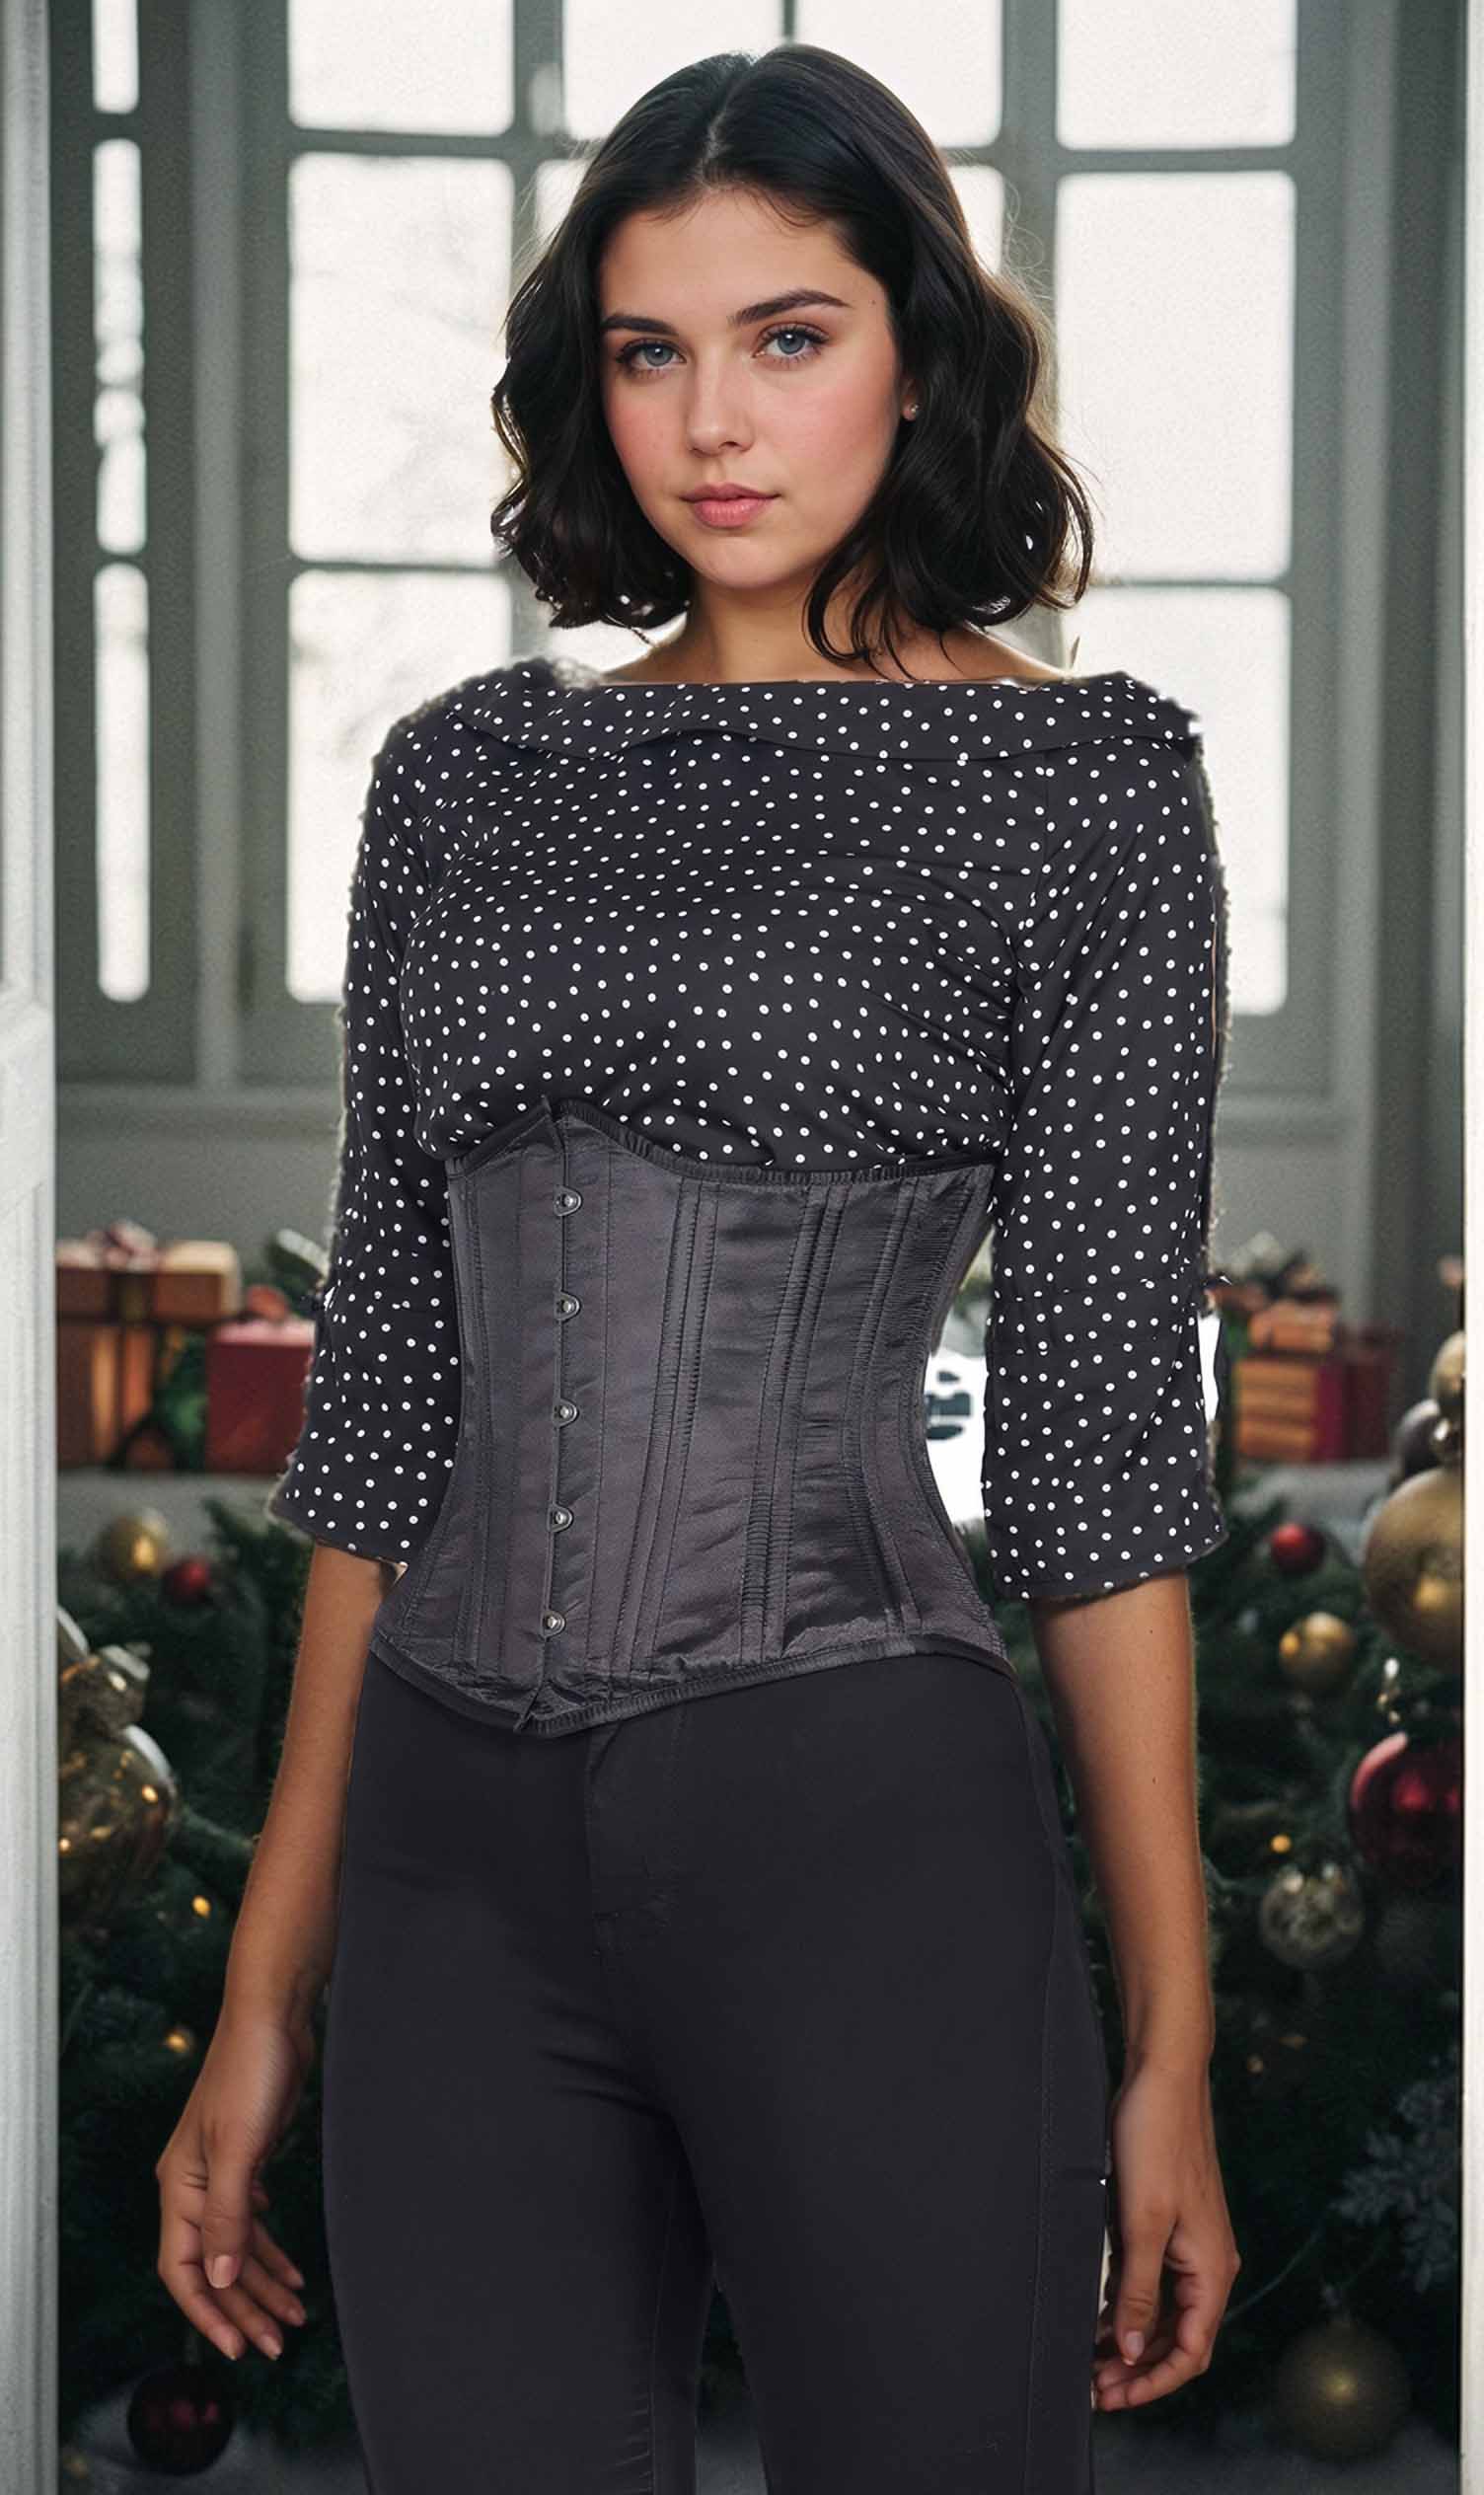 This Waist Trainer and Black Satin Corset is our Best Seller Style